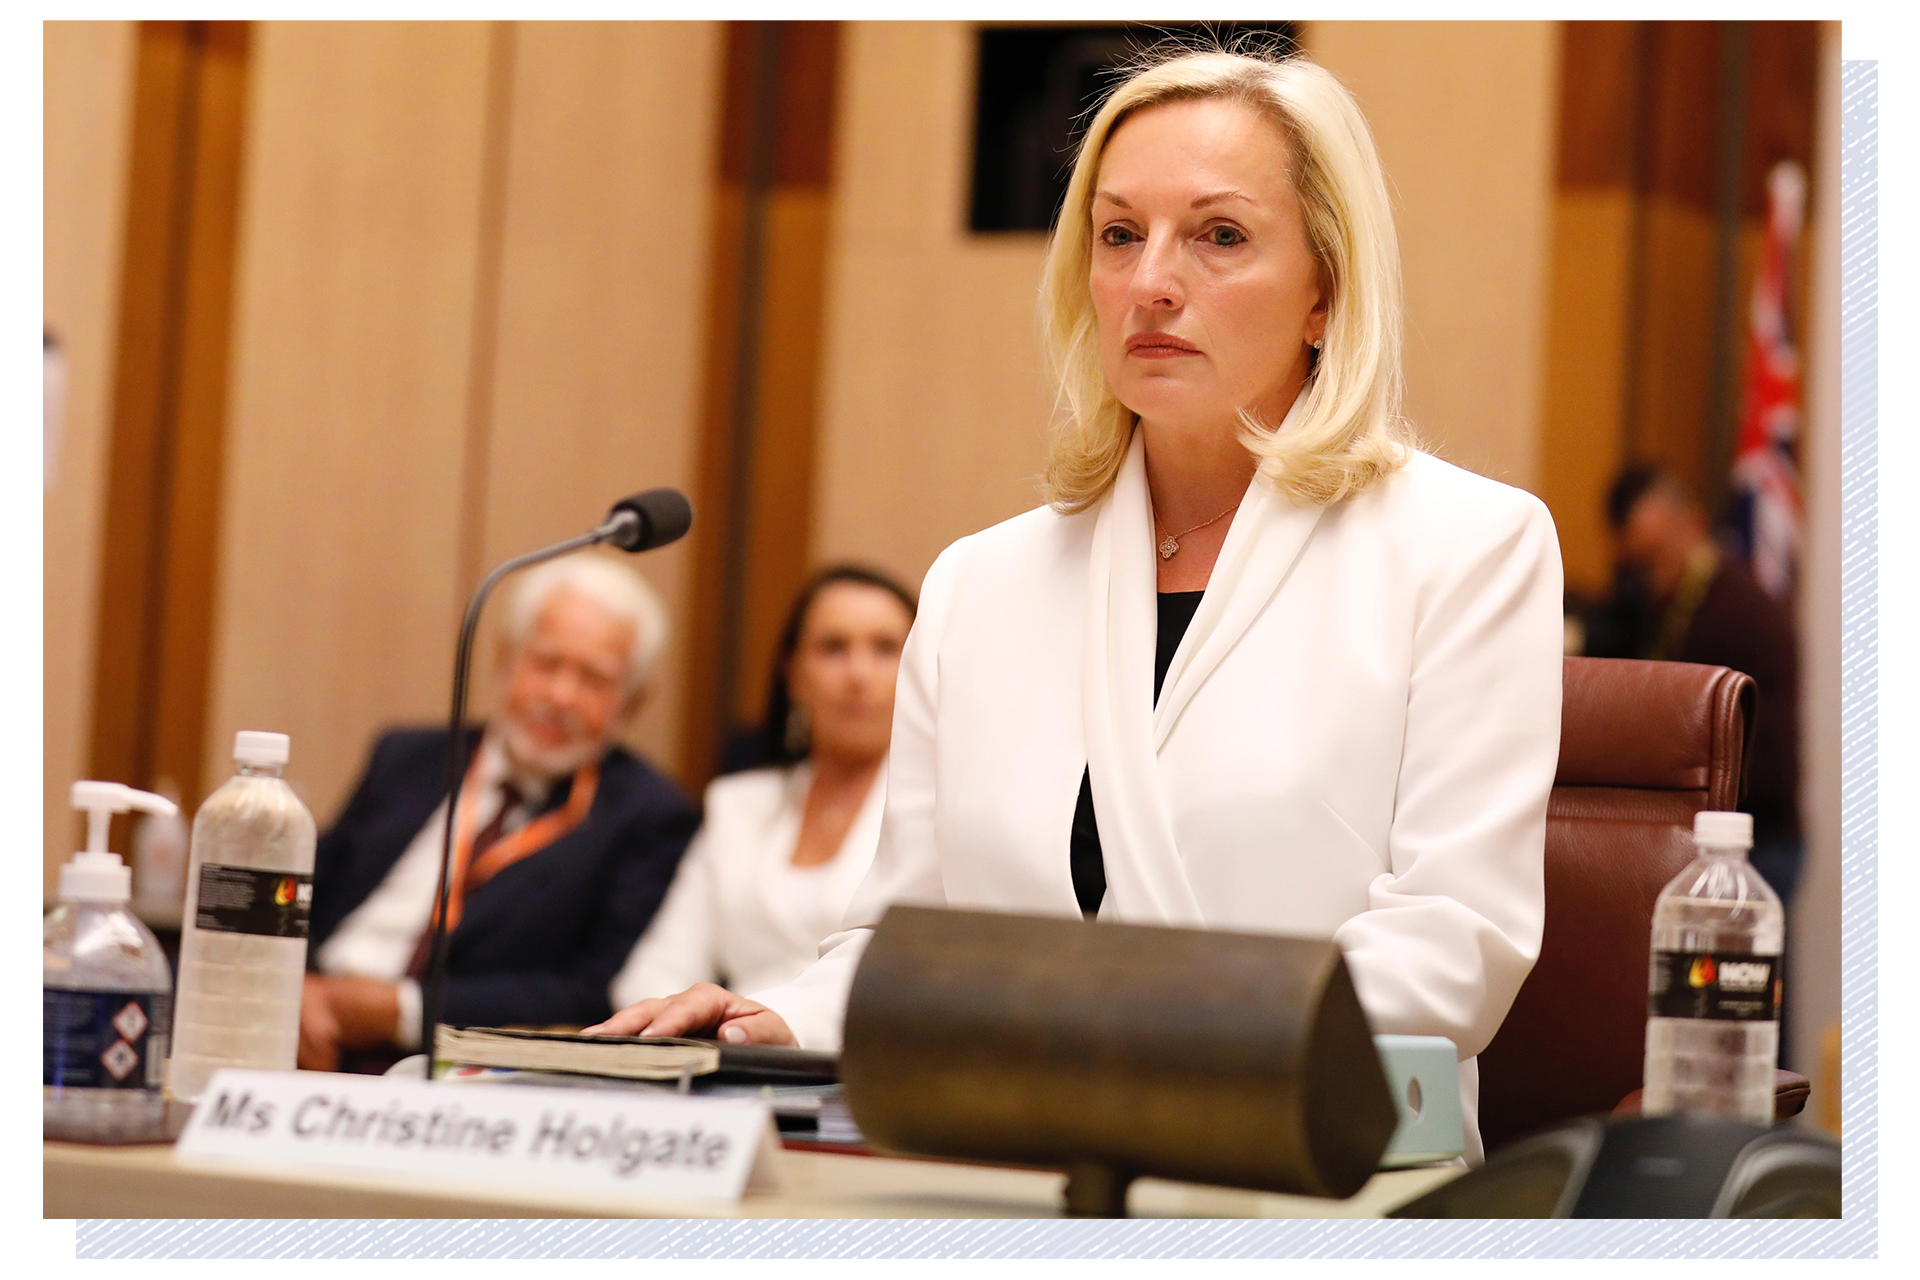 Christine Holgate wears a white jacket and sits at a table, in front of a microphone, while giving evidence at a senate hearing.